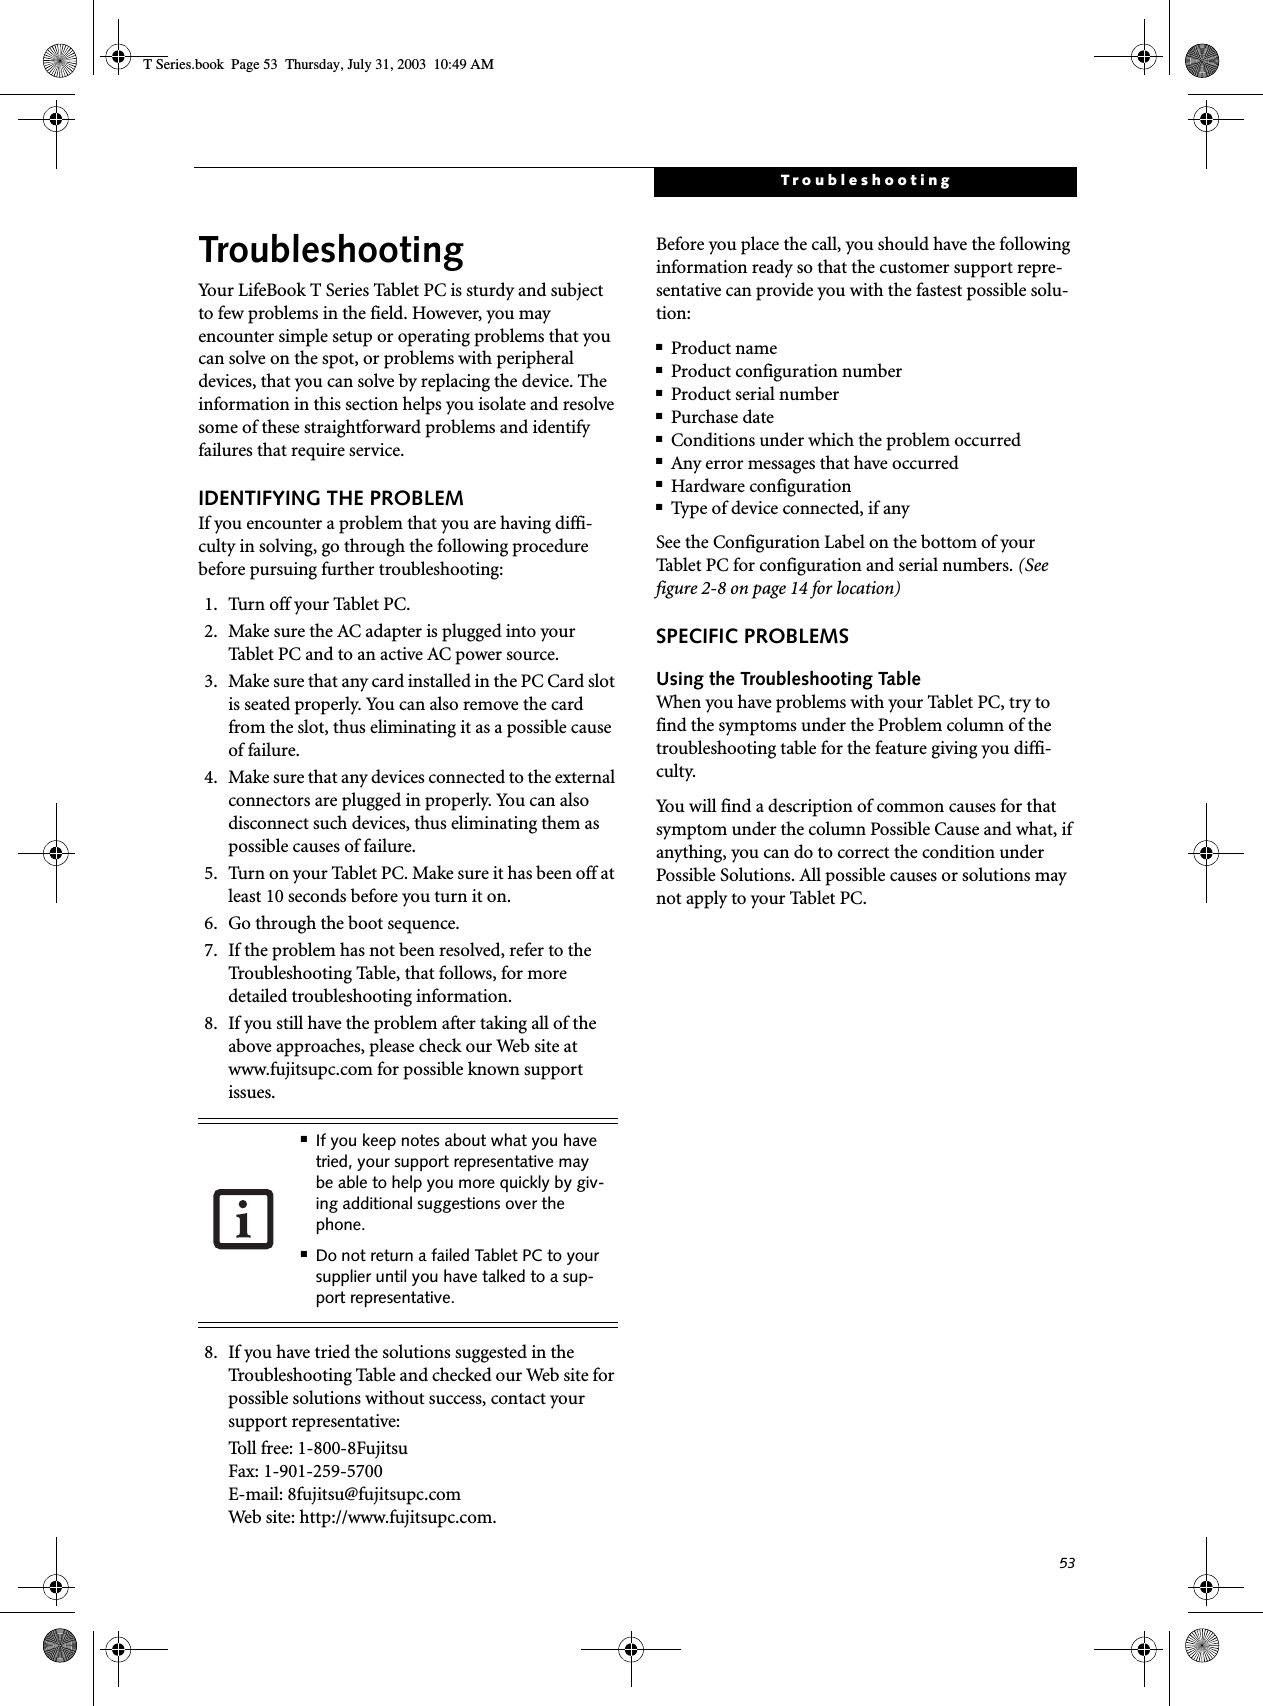 53TroubleshootingTroubleshootingYour LifeBook T Series Tablet PC is sturdy and subject to few problems in the field. However, you may encounter simple setup or operating problems that you can solve on the spot, or problems with peripheral devices, that you can solve by replacing the device. The information in this section helps you isolate and resolve some of these straightforward problems and identify failures that require service.IDENTIFYING THE PROBLEMIf you encounter a problem that you are having diffi-culty in solving, go through the following procedure before pursuing further troubleshooting:1. Turn of f you r Table t PC .2. Make sure the AC adapter is plugged into your Tablet PC and to an active AC power source.3. Make sure that any card installed in the PC Card slot is seated properly. You can also remove the card from the slot, thus eliminating it as a possible cause of failure.4. Make sure that any devices connected to the external connectors are plugged in properly. You can also disconnect such devices, thus eliminating them as possible causes of failure.5. Turn on your Tablet PC. Make sure it has been off at least 10 seconds before you turn it on.6. Go through the boot sequence.7. If the problem has not been resolved, refer to the Troubleshooting Table, that follows, for more detailed troubleshooting information.8. If you still have the problem after taking all of the above approaches, please check our Web site at www.fujitsupc.com for possible known support issues. 8. If you have tried the solutions suggested in the Troubleshooting Table and checked our Web site for possible solutions without success, contact your support representative: Toll free: 1-800-8Fujitsu Fax: 1-901-259-5700 E-mail: 8fujitsu@fujitsupc.com Web site: http://www.fujitsupc.com.Before you place the call, you should have the following information ready so that the customer support repre-sentative can provide you with the fastest possible solu-tion:■Product name■Product configuration number■Product serial number■Purchase date■Conditions under which the problem occurred■Any error messages that have occurred■Hardware configuration■Type of device connected, if anySee the Configuration Label on the bottom of yourTablet PC for configuration and serial numbers. (See figure 2-8 on page 14 for location)SPECIFIC PROBLEMSUsing the Troubleshooting TableWhen you have problems with your Tablet PC, try to find the symptoms under the Problem column of the troubleshooting table for the feature giving you diffi-culty. You will find a description of common causes for that symptom under the column Possible Cause and what, if anything, you can do to correct the condition under Possible Solutions. All possible causes or solutions may not apply to your Tablet PC.■If you keep notes about what you have tried, your support representative may be able to help you more quickly by giv-ing additional suggestions over the phone.■Do not return a failed Tablet PC to your supplier until you have talked to a sup-port representative.T Series.book  Page 53  Thursday, July 31, 2003  10:49 AM